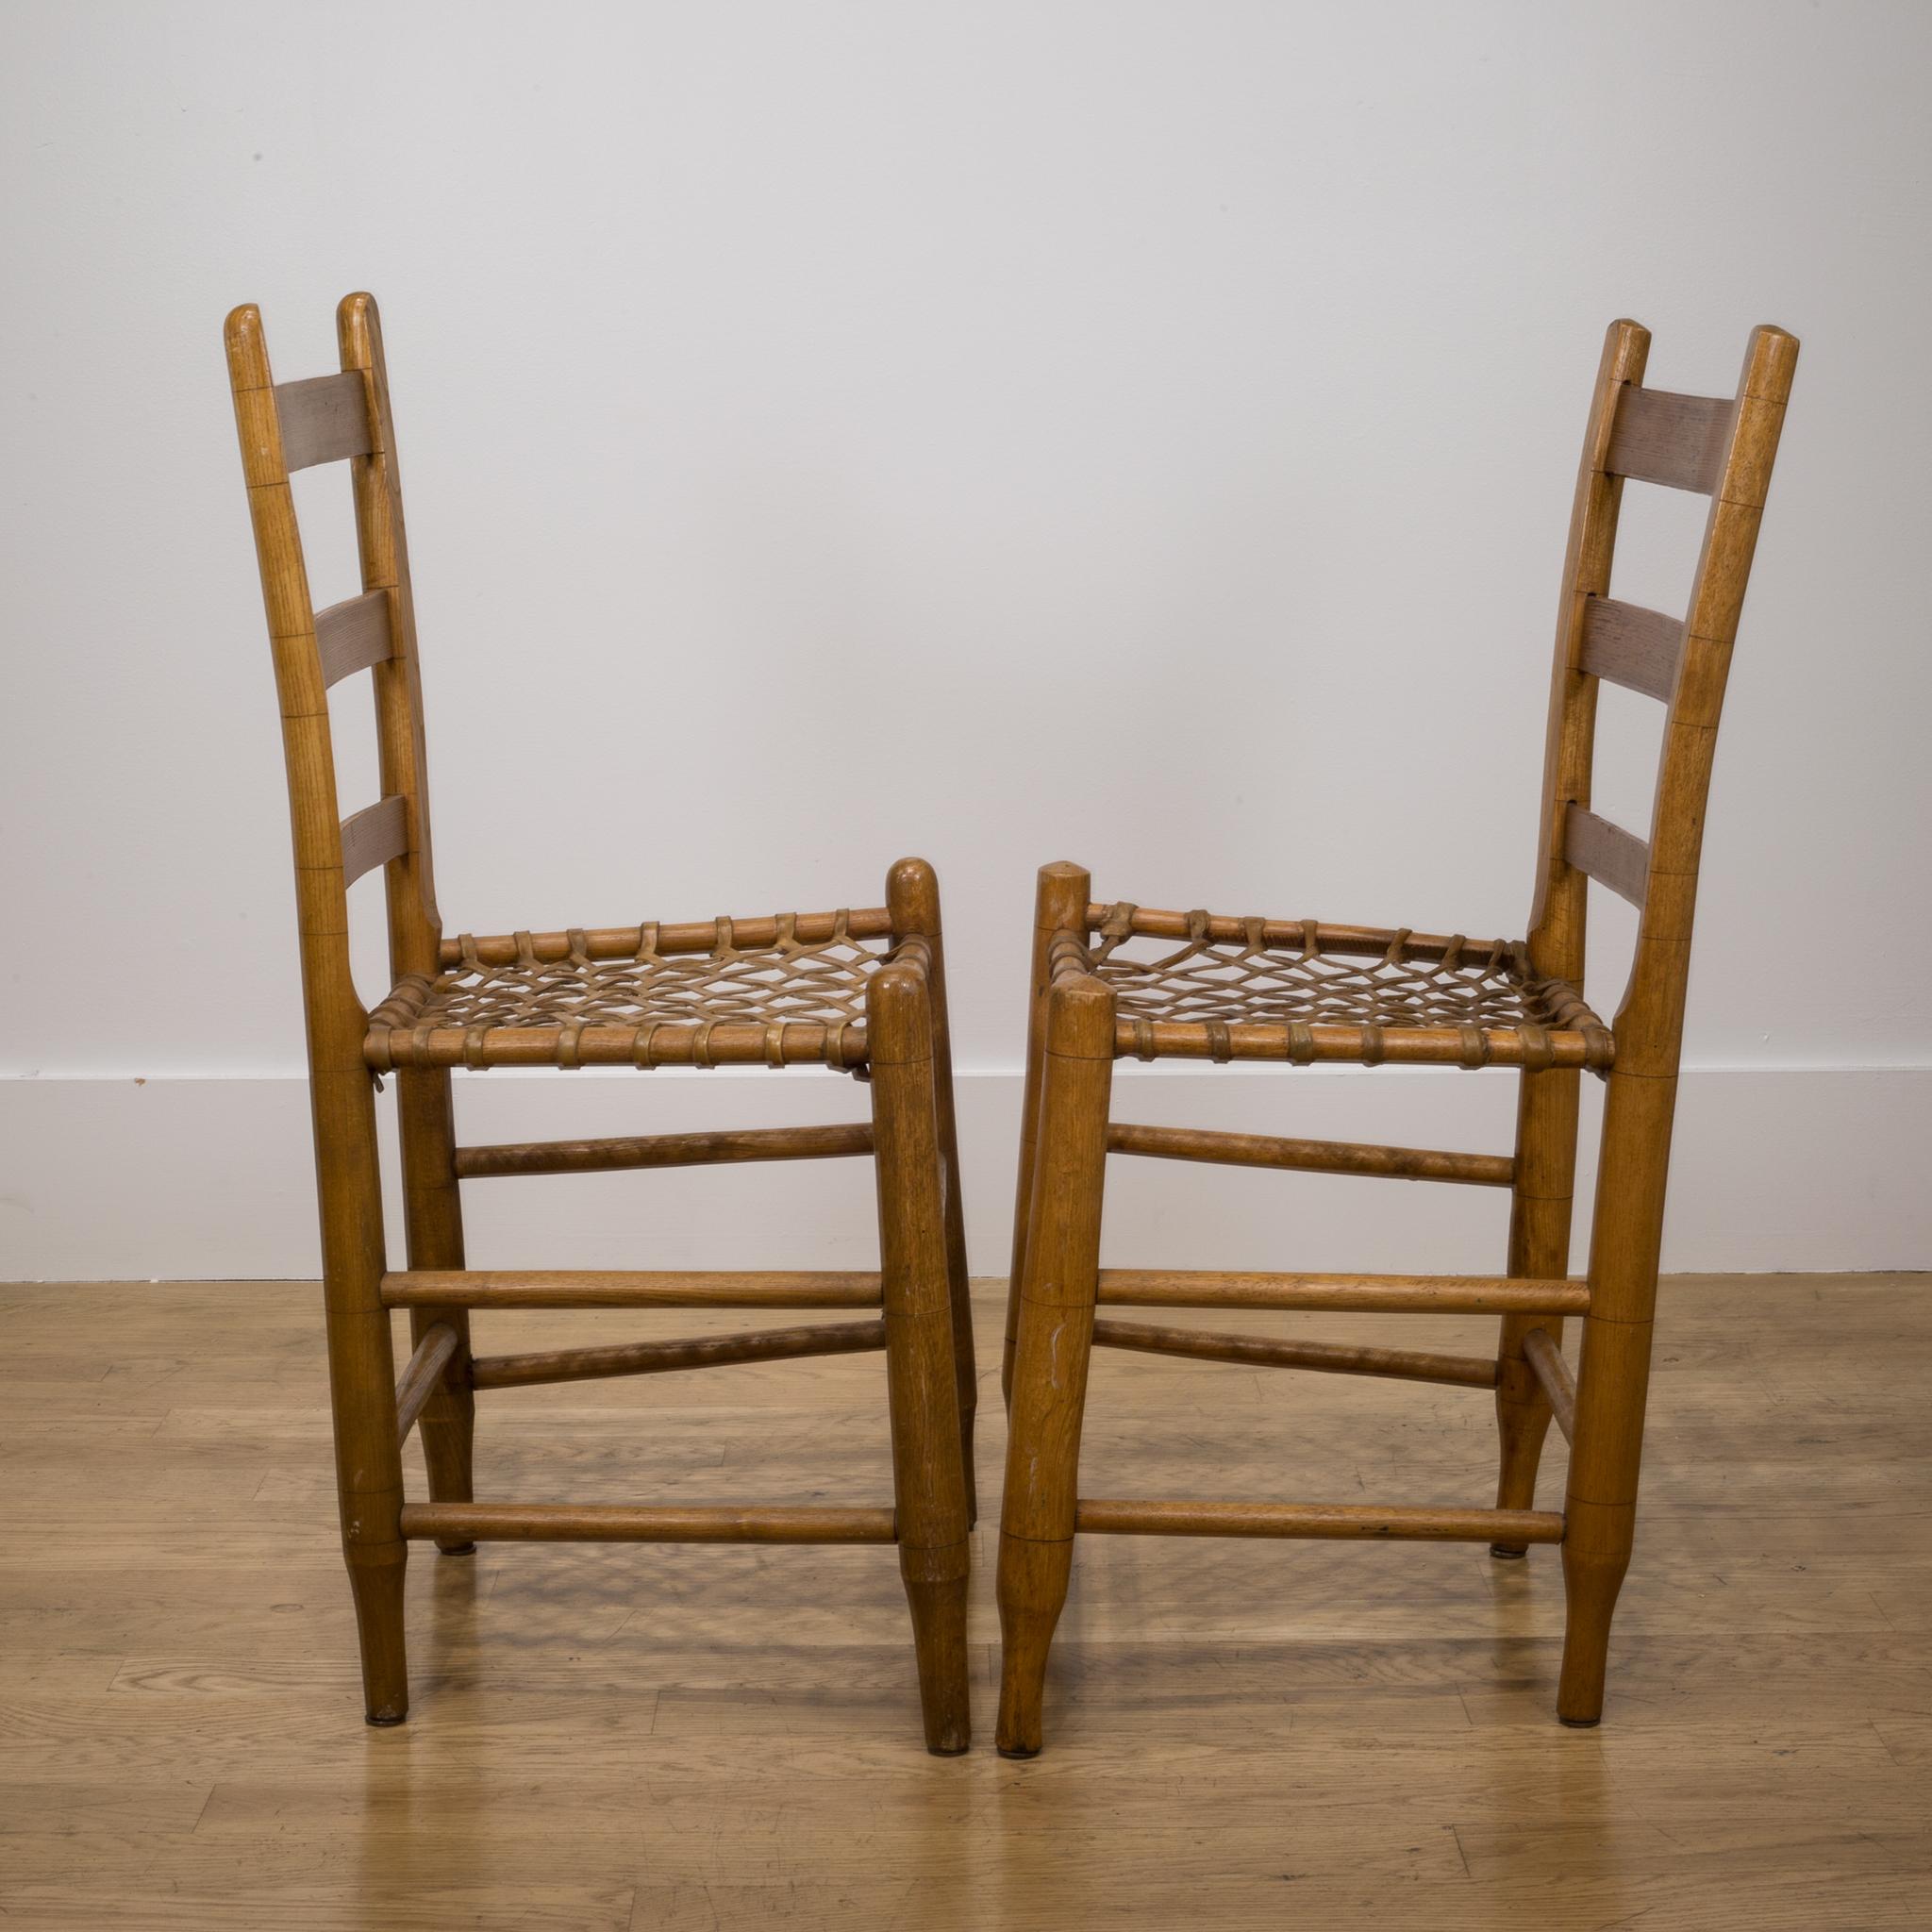 19th c. Handmade Wood/Rawhide Chairs from Historic  Oregon Commune c. 1856-1866 7